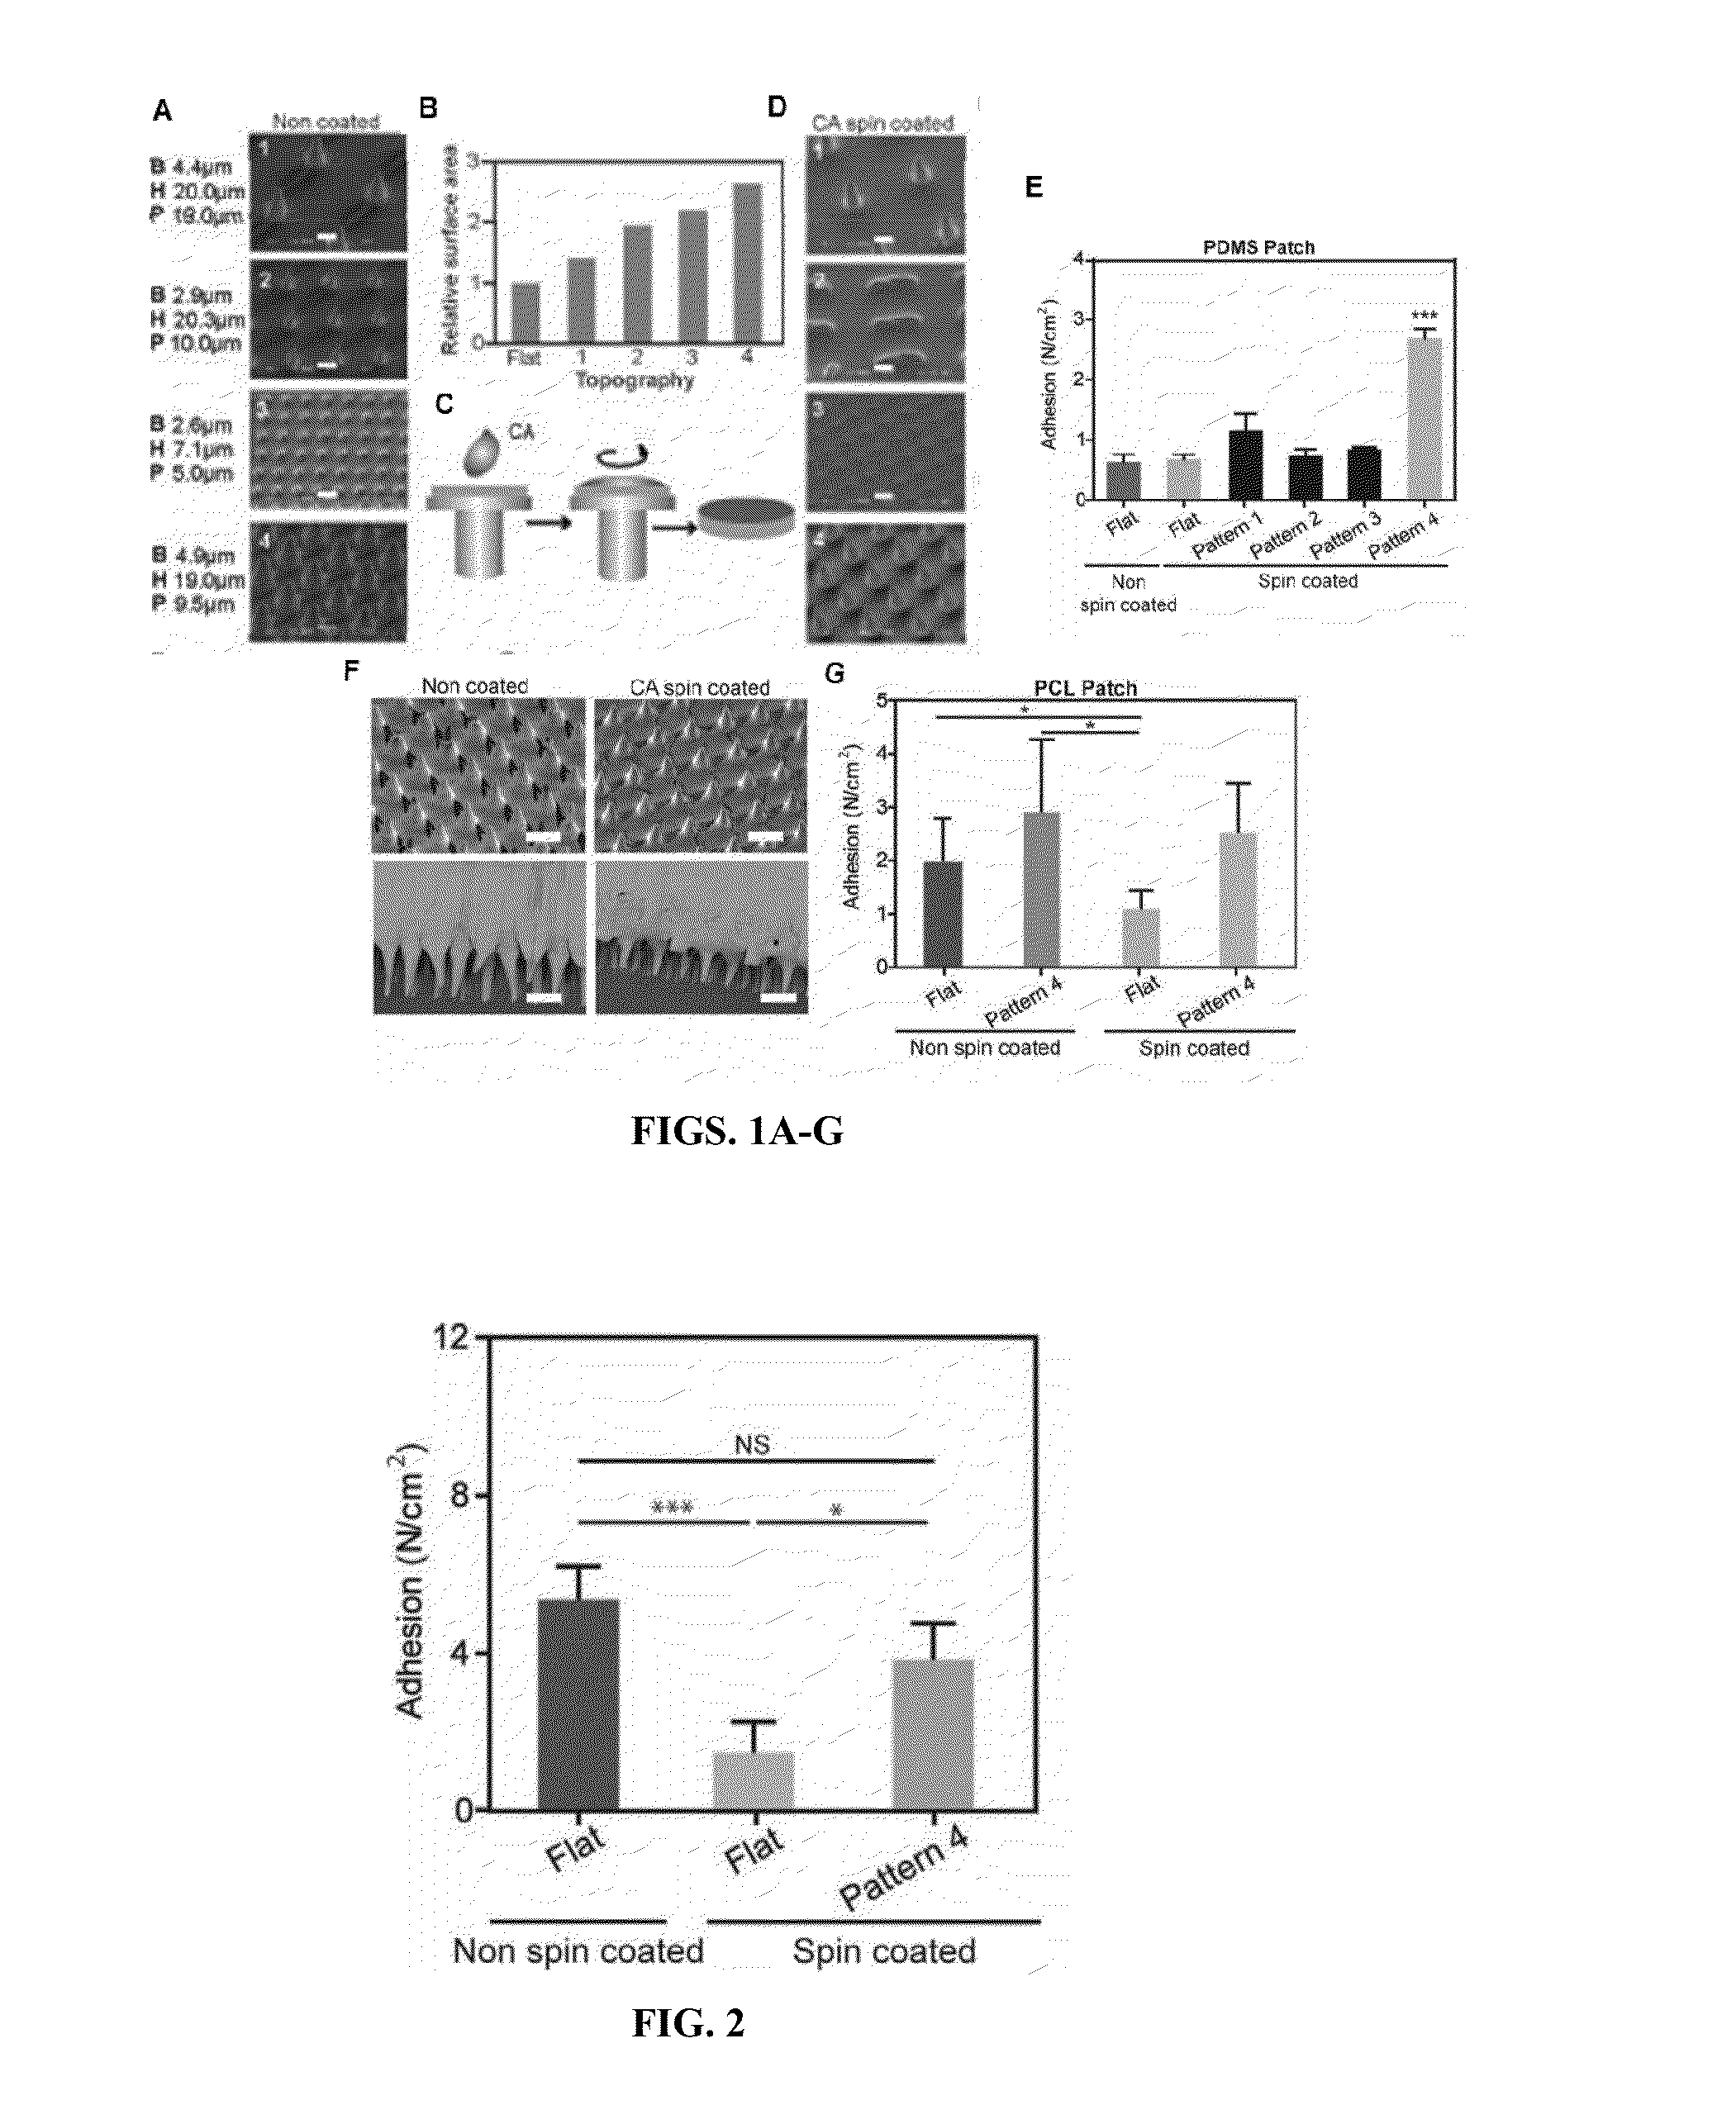 Adhesive Articles Containing a Combination of Surface Micropatterning and Reactive Chemistry and Methods of Making and Using Thereof